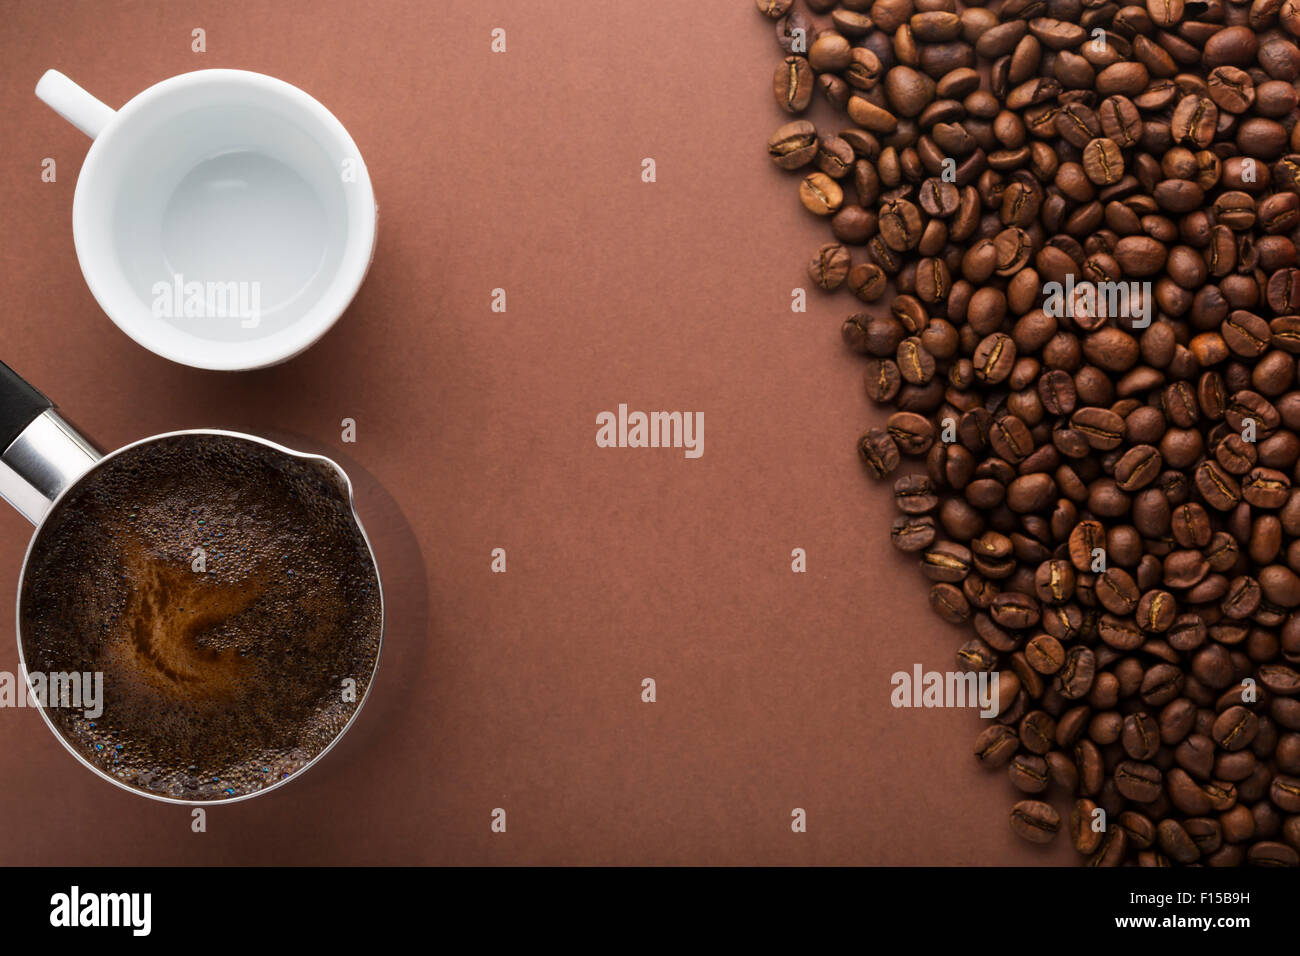 Pot of coffee, coffee beans and white empty cup on brown background. Top view. Focus on pot Stock Photo